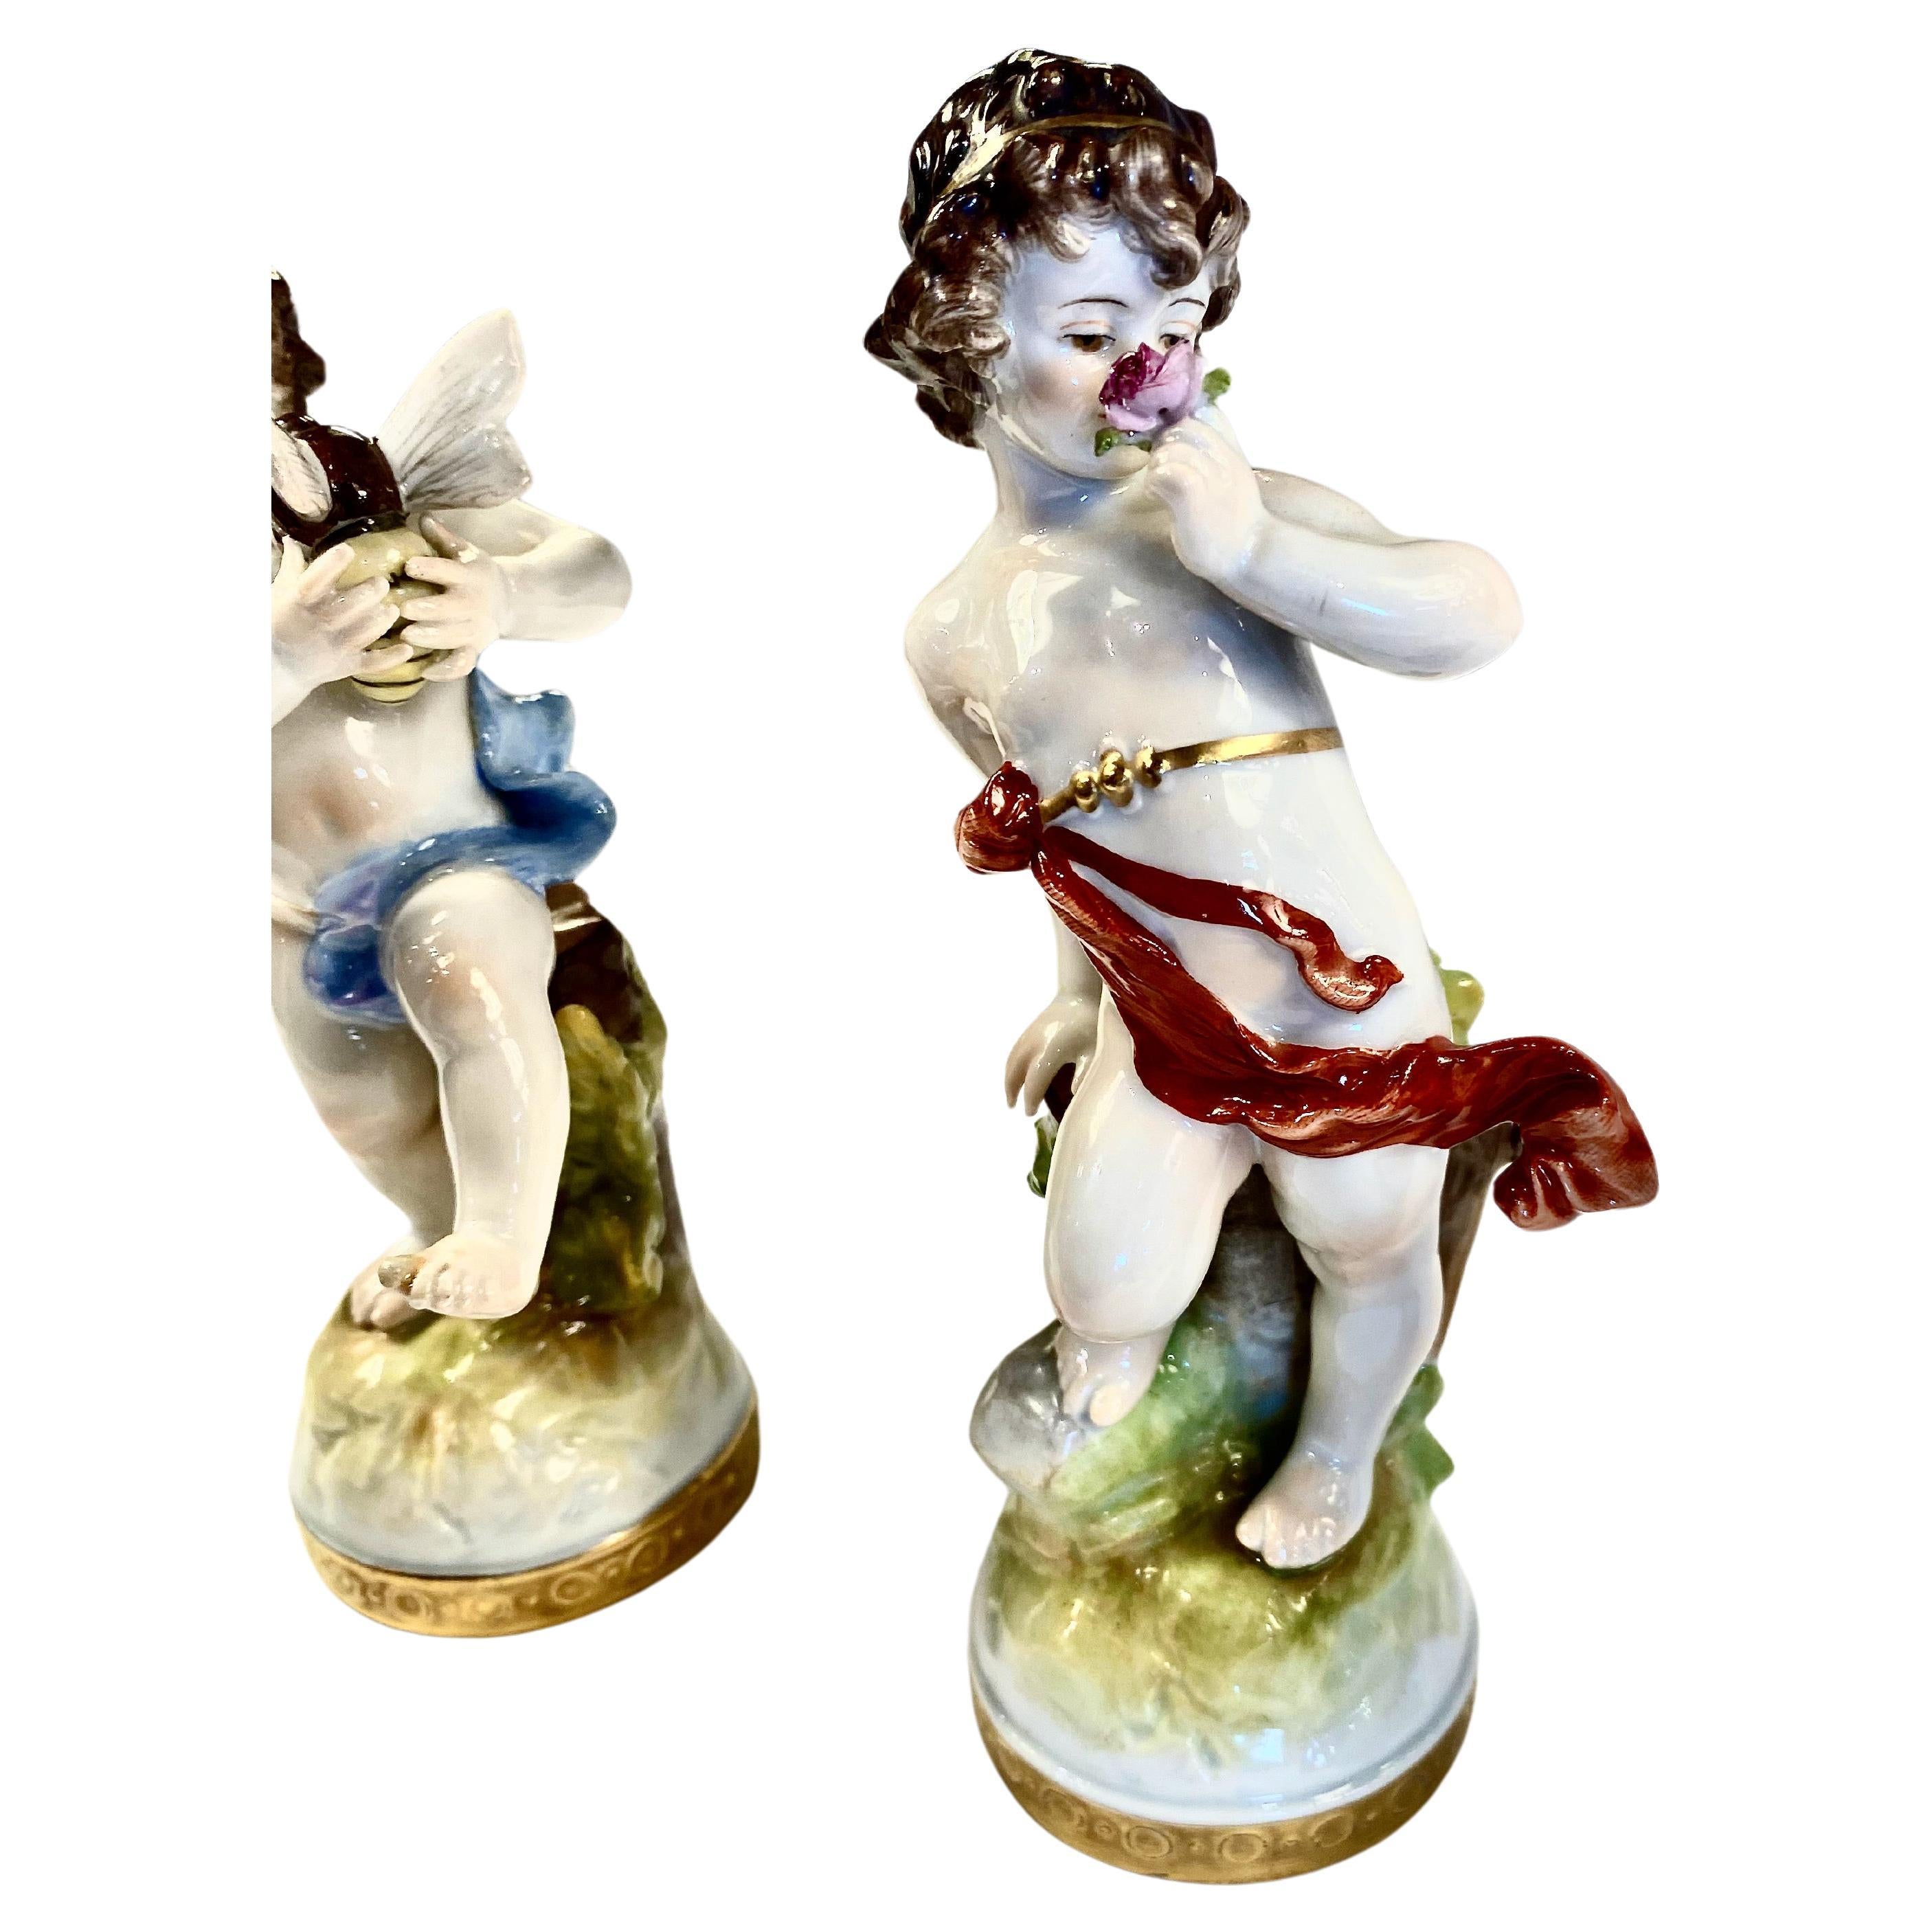 Grouping of Rudolstadt Volkstedt Putti Figurines, Set of 5 In Good Condition For Sale In Pasadena, CA